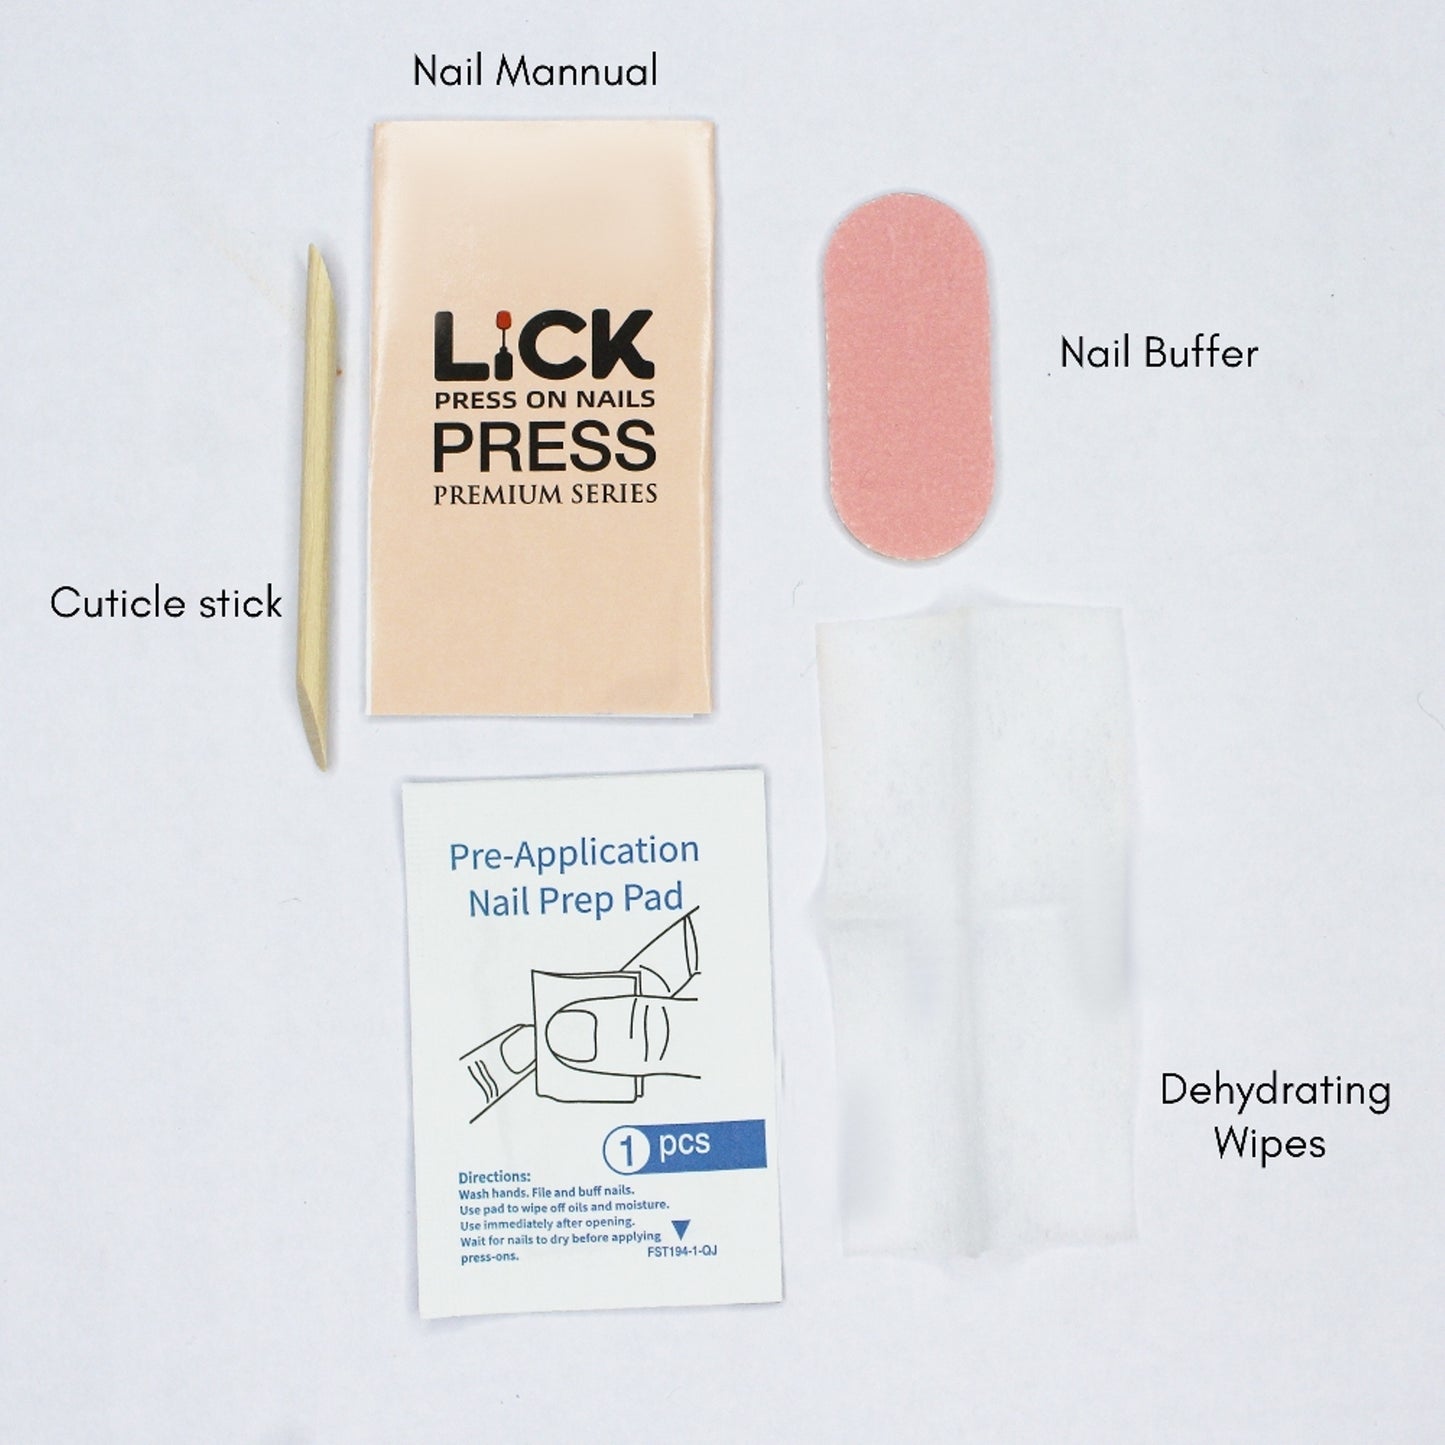 LICK NAILS Griege with check print Shade Press on Nails